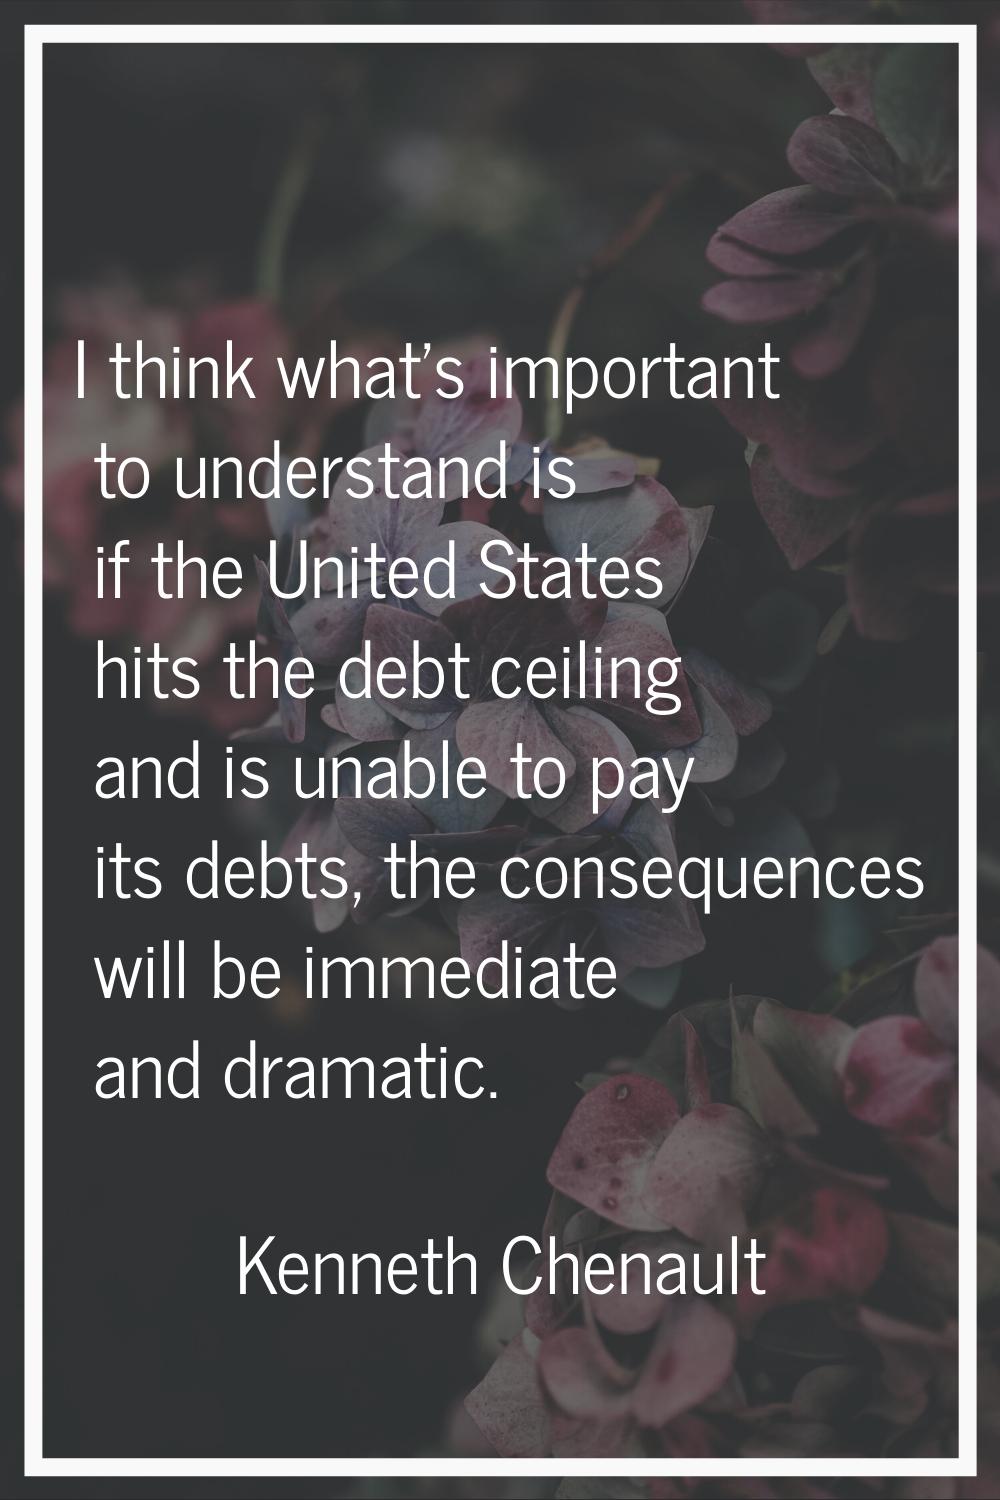 I think what's important to understand is if the United States hits the debt ceiling and is unable 